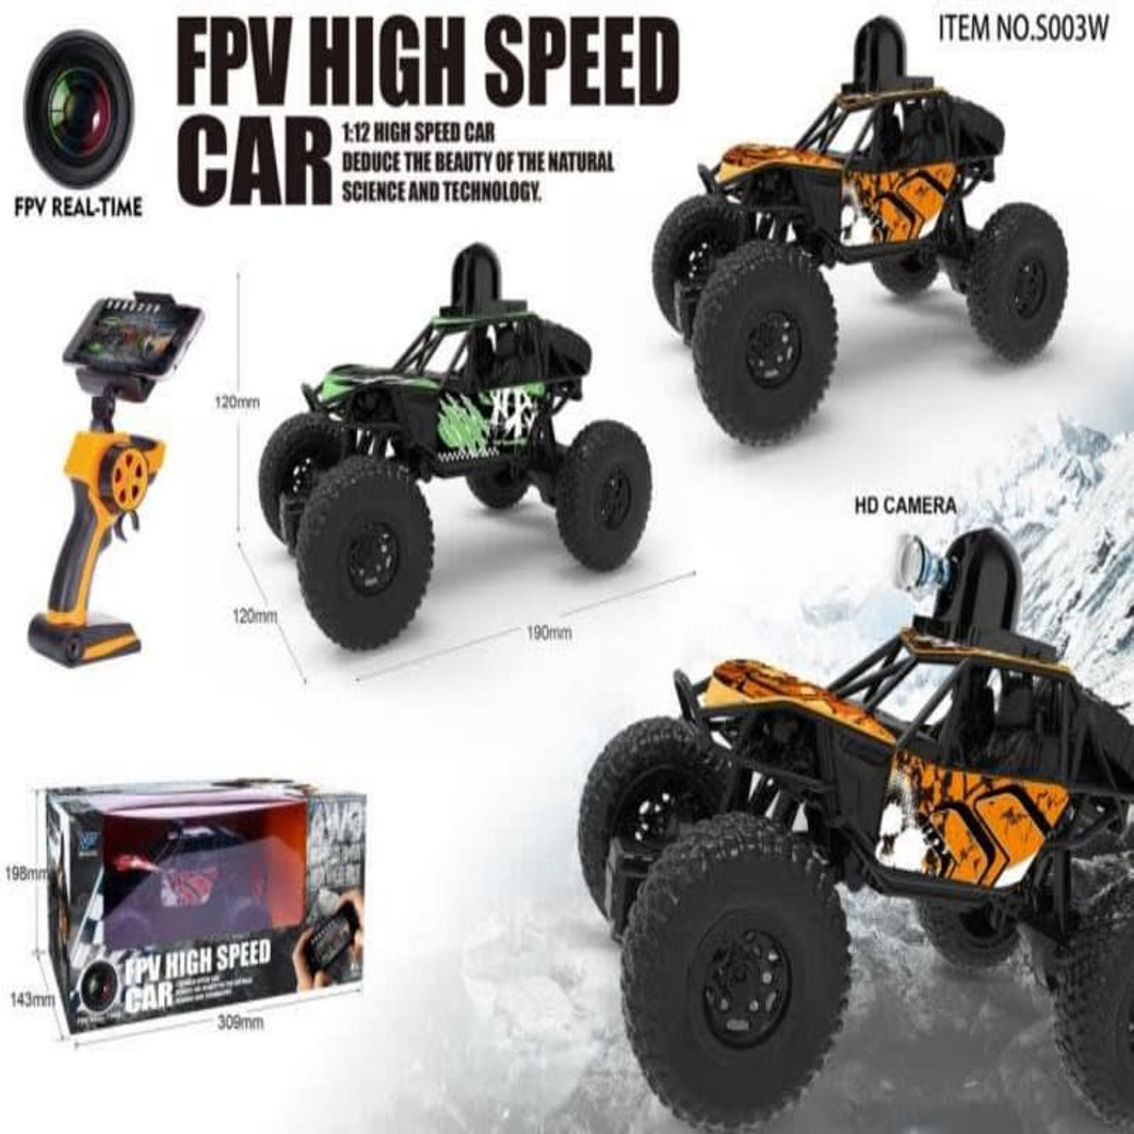 CIS-S-003W-G 1:22 rock climber with FPV camera Proportional speed and steering - Image 3 of 5